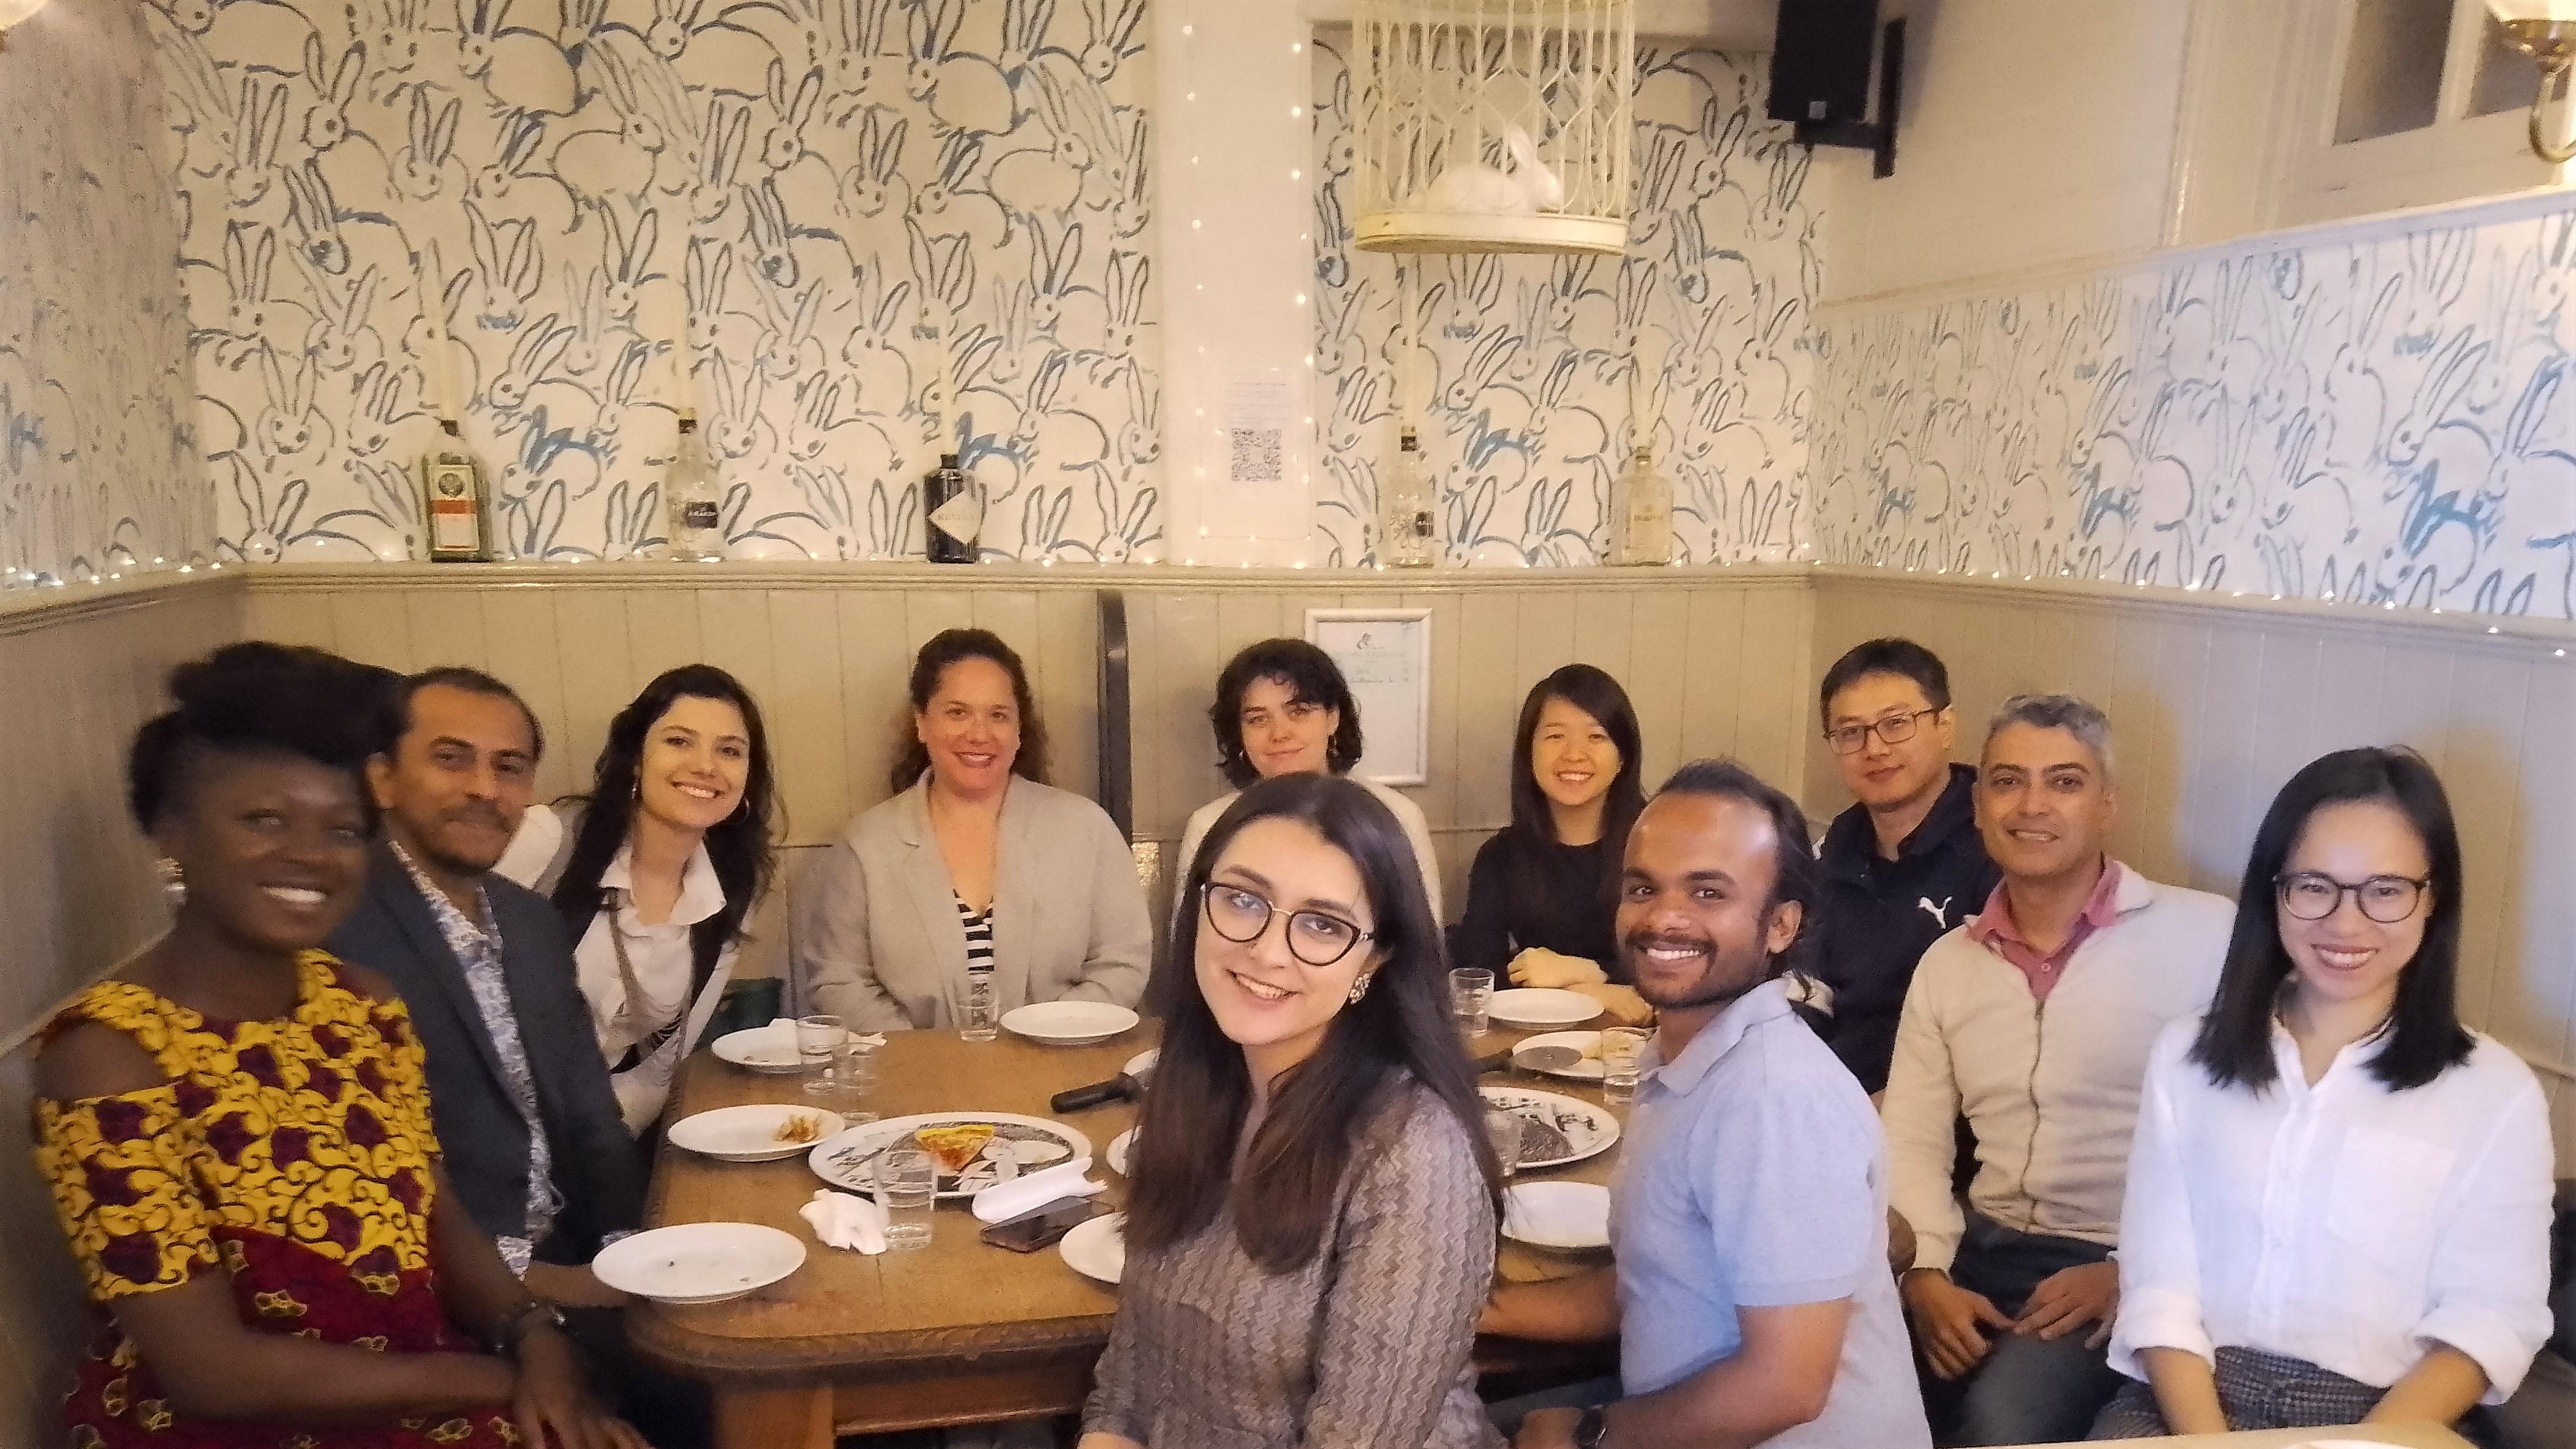 OIPRC graduate student members and visiting researchers discussing food for thought over pizzas